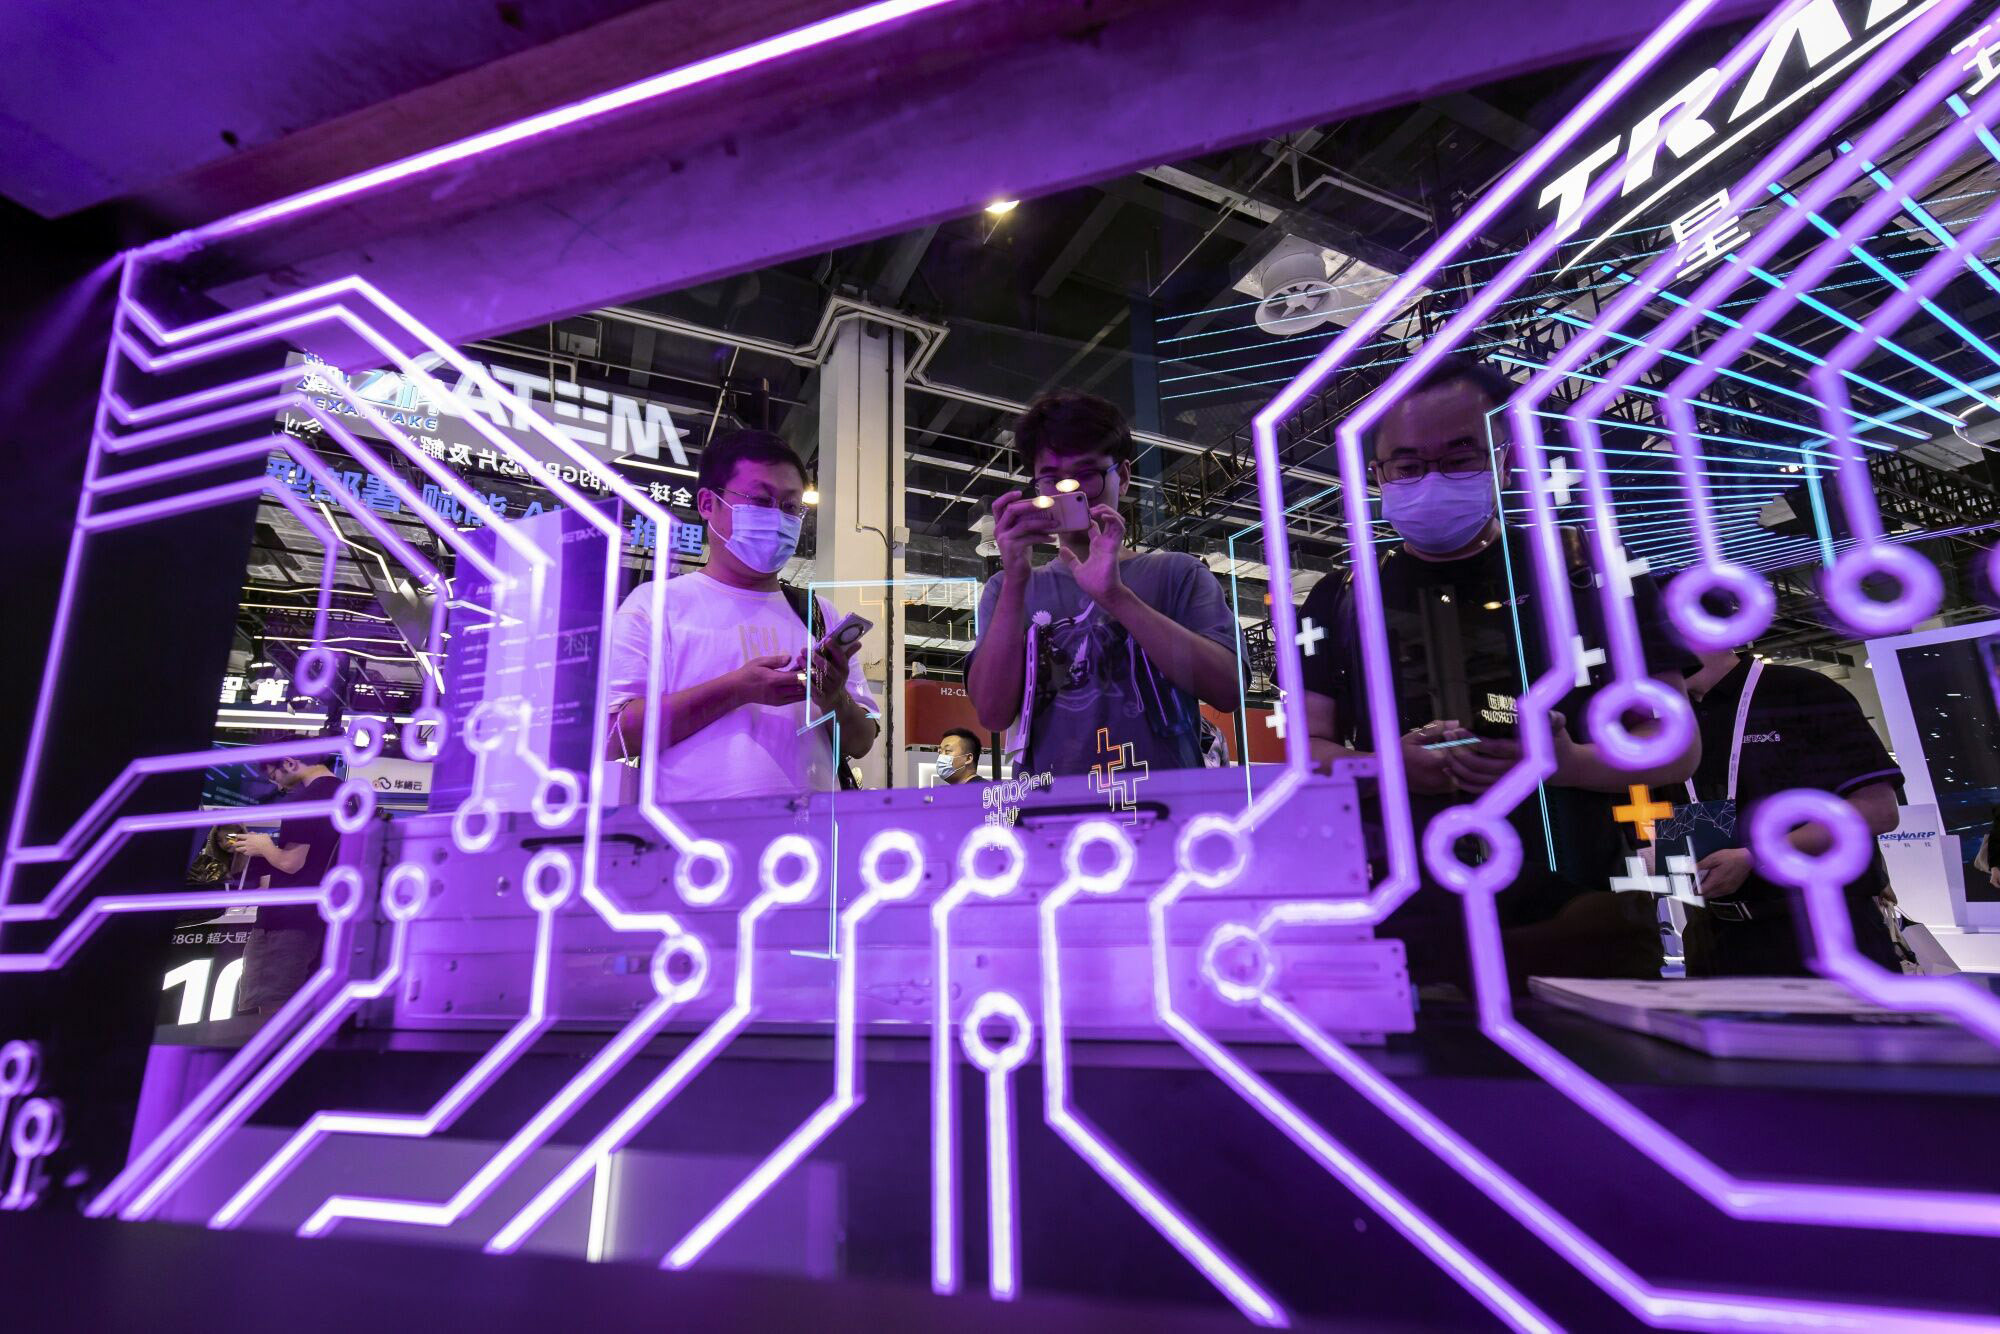 Beijing has directed several agencies to “thoroughly implement” the Eastern Data and Western Computing project and speed up construction of a nationwide integrated computing power network to help boost the country’s digital economy. Photo: Bloomberg